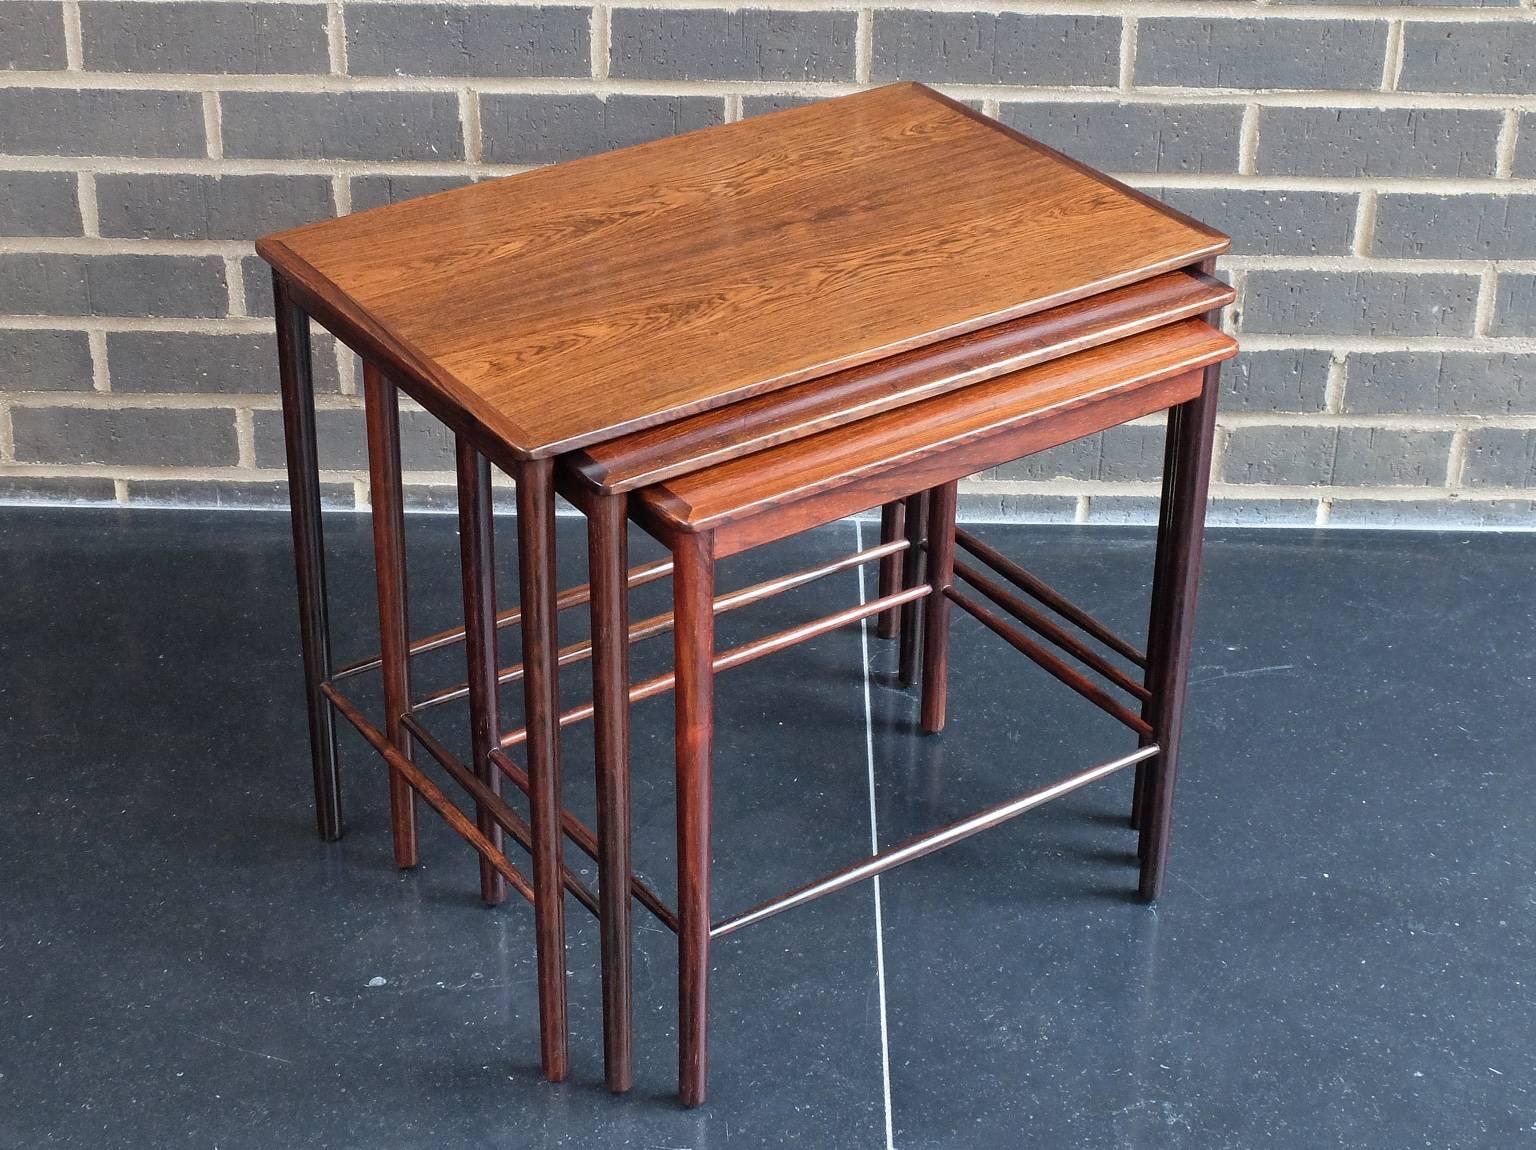 A nest of three occasional tables designed by revered designer Kai Winding and manufactured by Poul Jeppesen, Denmark, circa 1960. These elegant tables are beautifully crafted from Brazilian rosewood. Please note that there are differences in colour